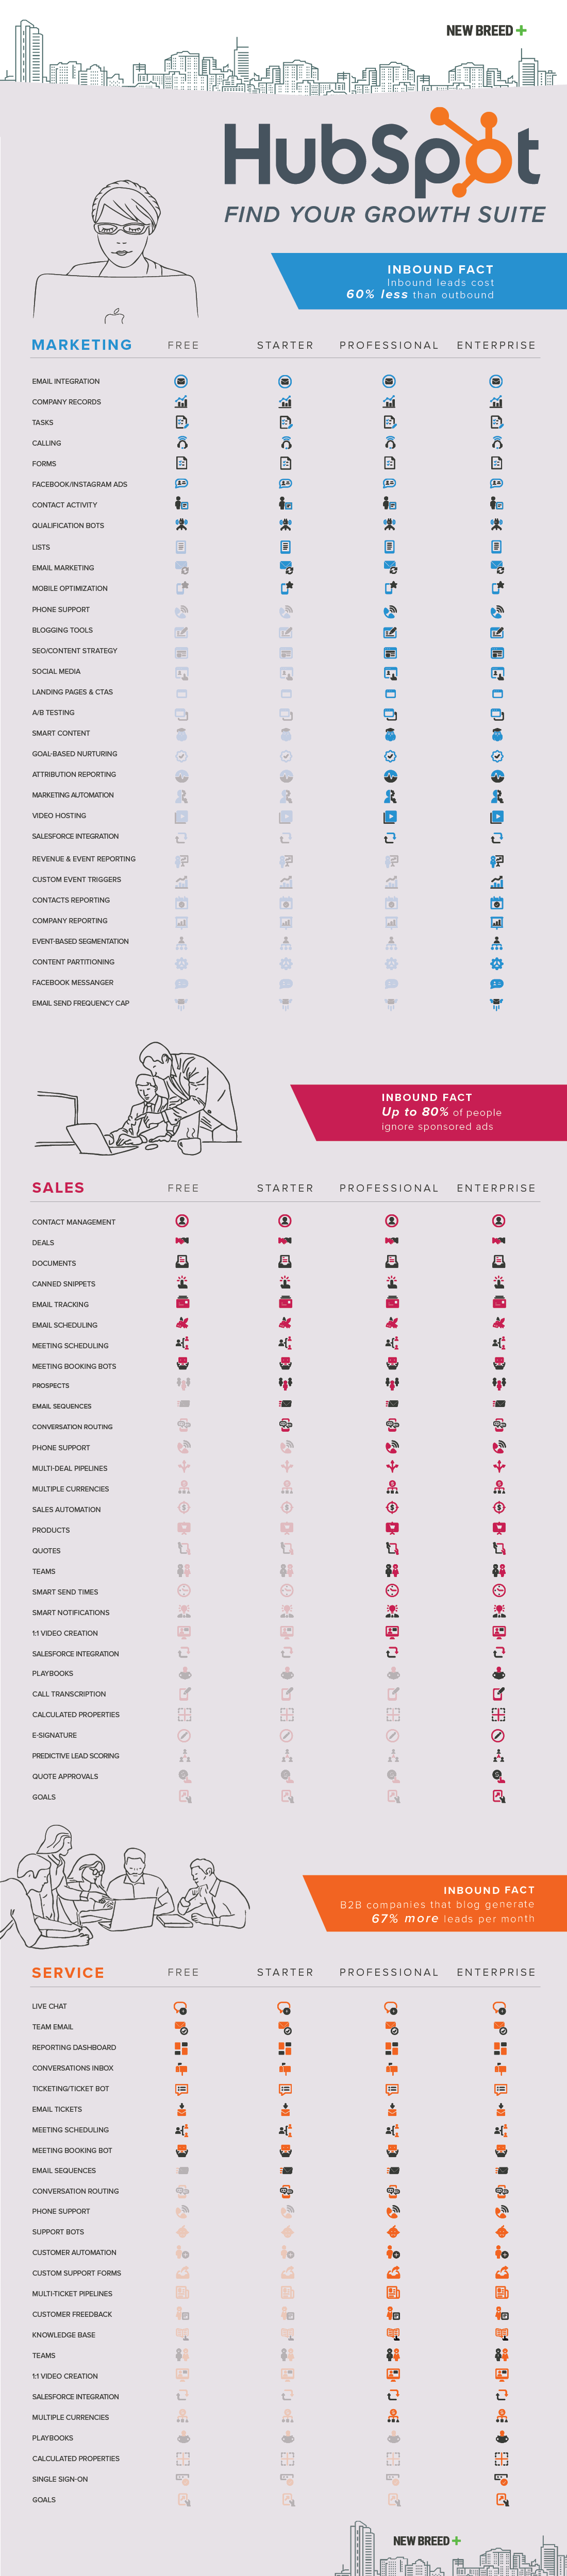 200003-nbm-hubspot-growth-suite-infographic-v7